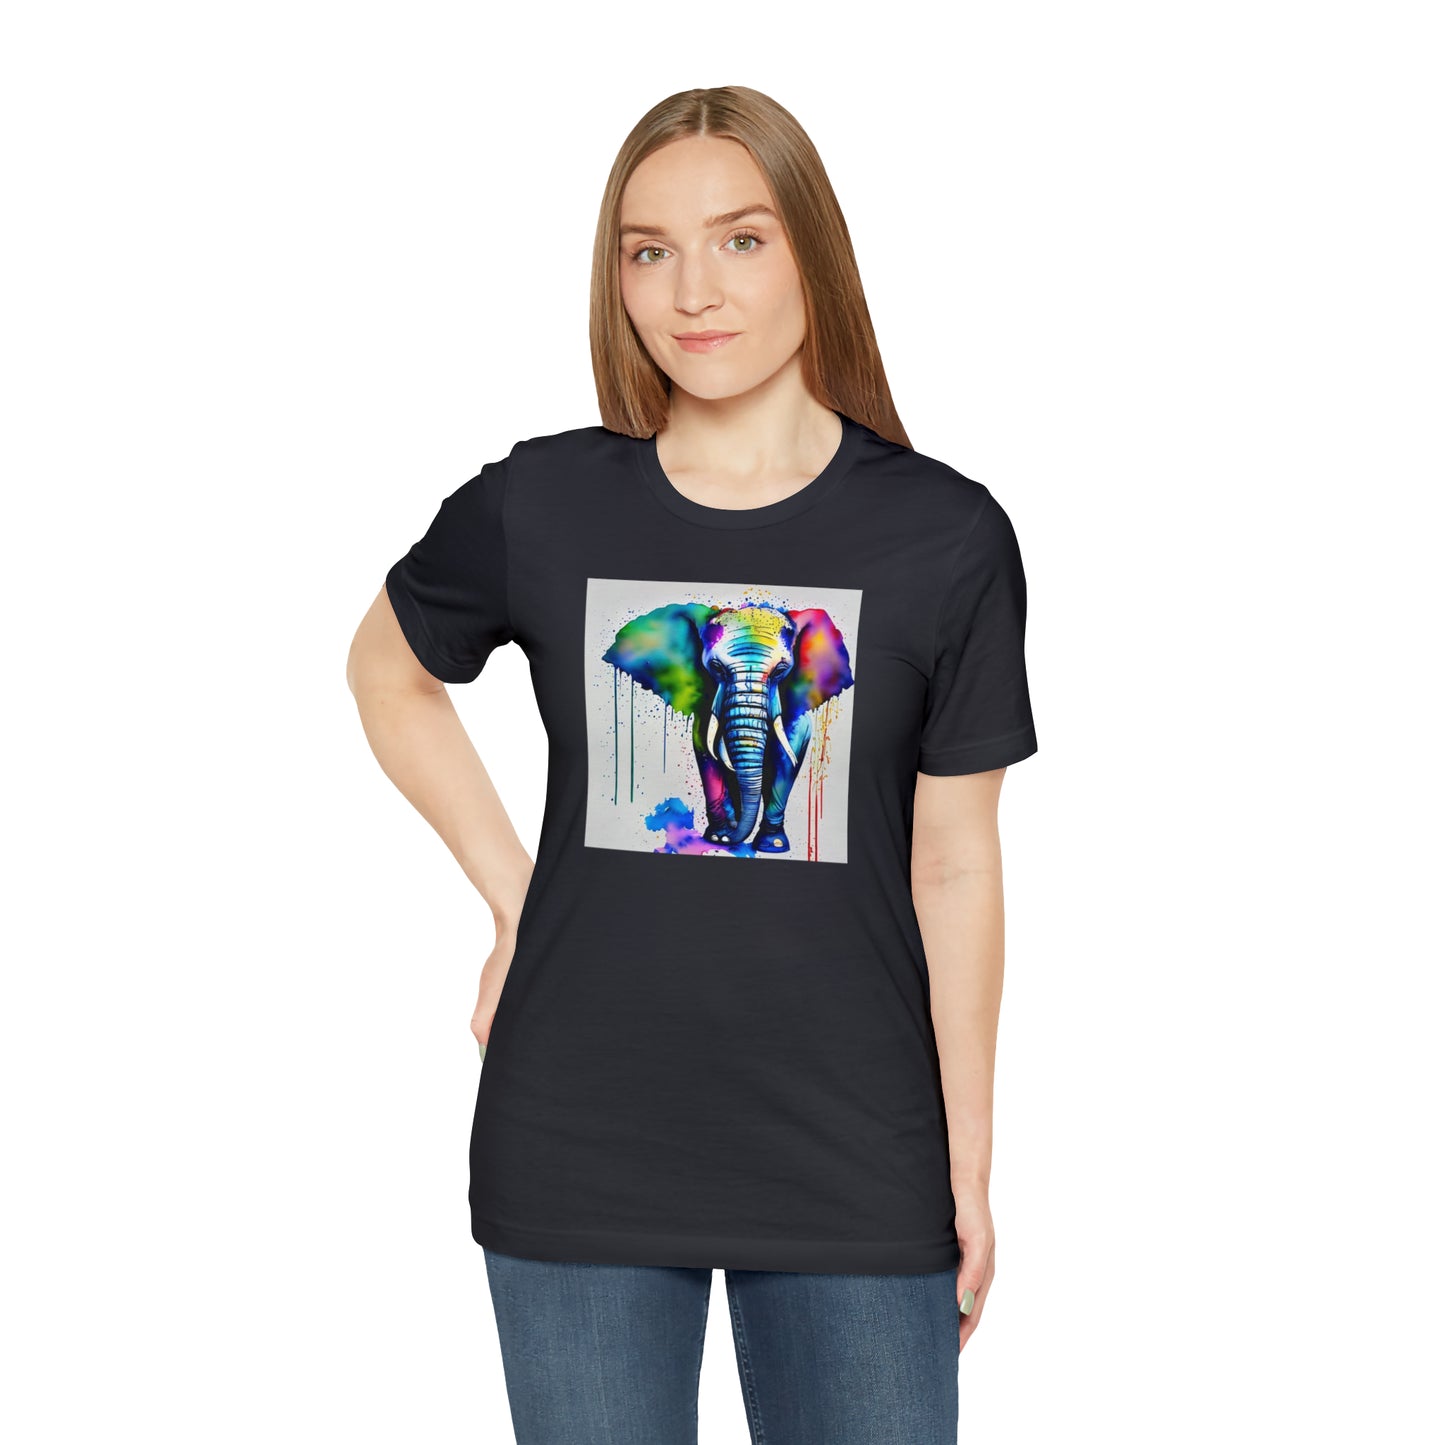 Dripping Watercolor Elephant Tee